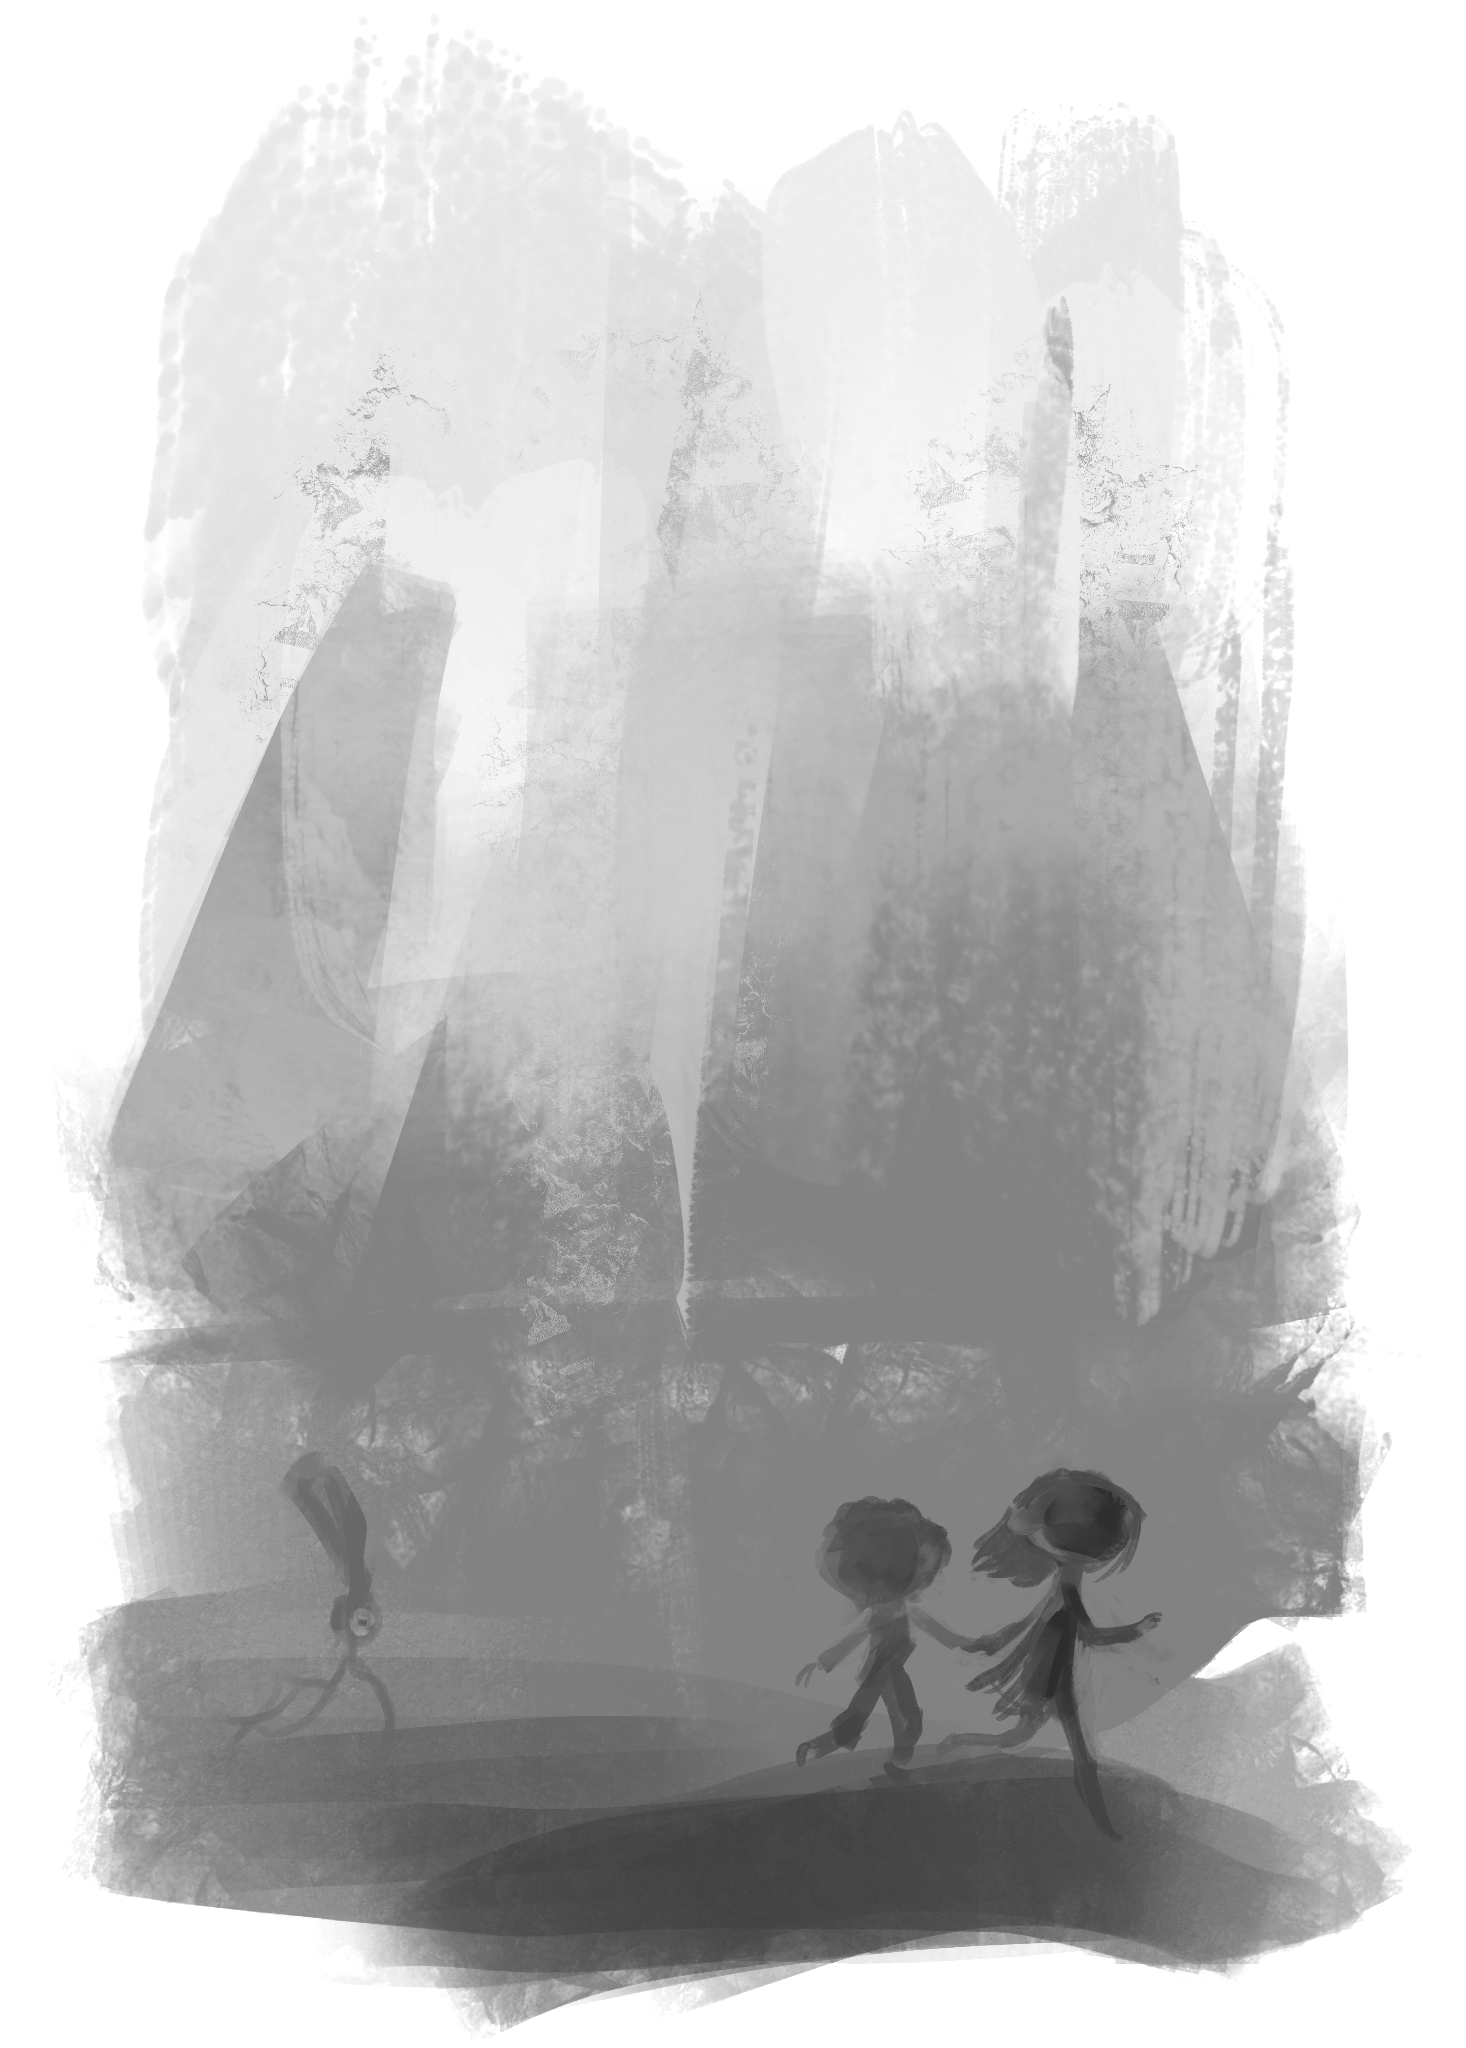 Silhouettes of children lost in the mist fleeing from a small monster in the distance.